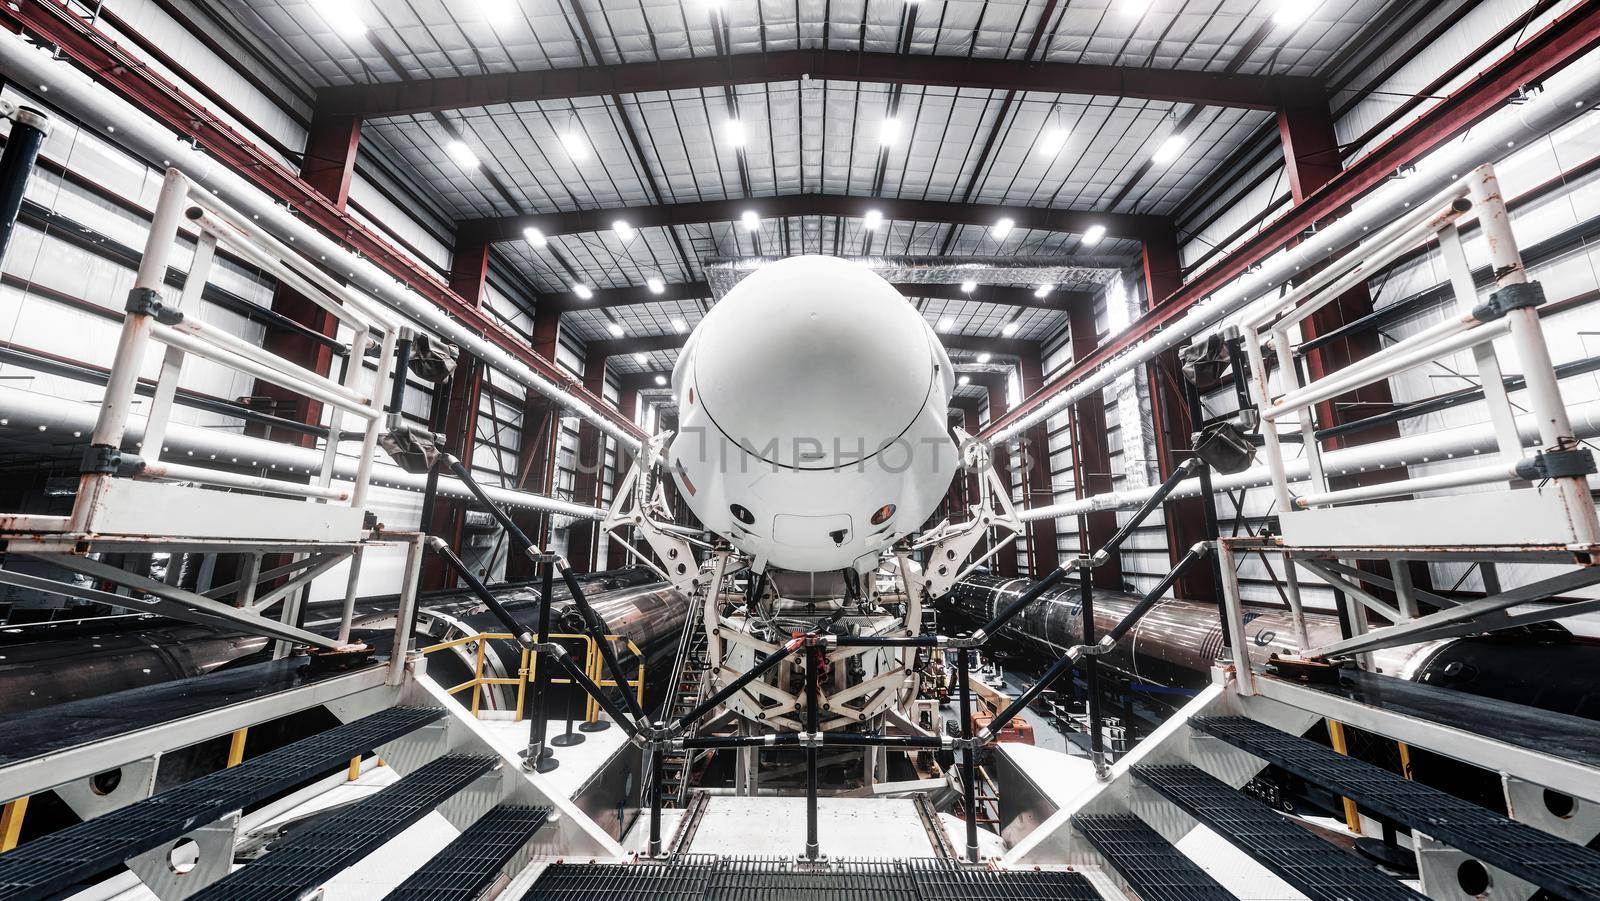 Space launch preparation. Spaceship atop the rocket, inside the hangar, just before rollout to the launchpad. Elements of this image furnished by NASA by EvgeniyQW